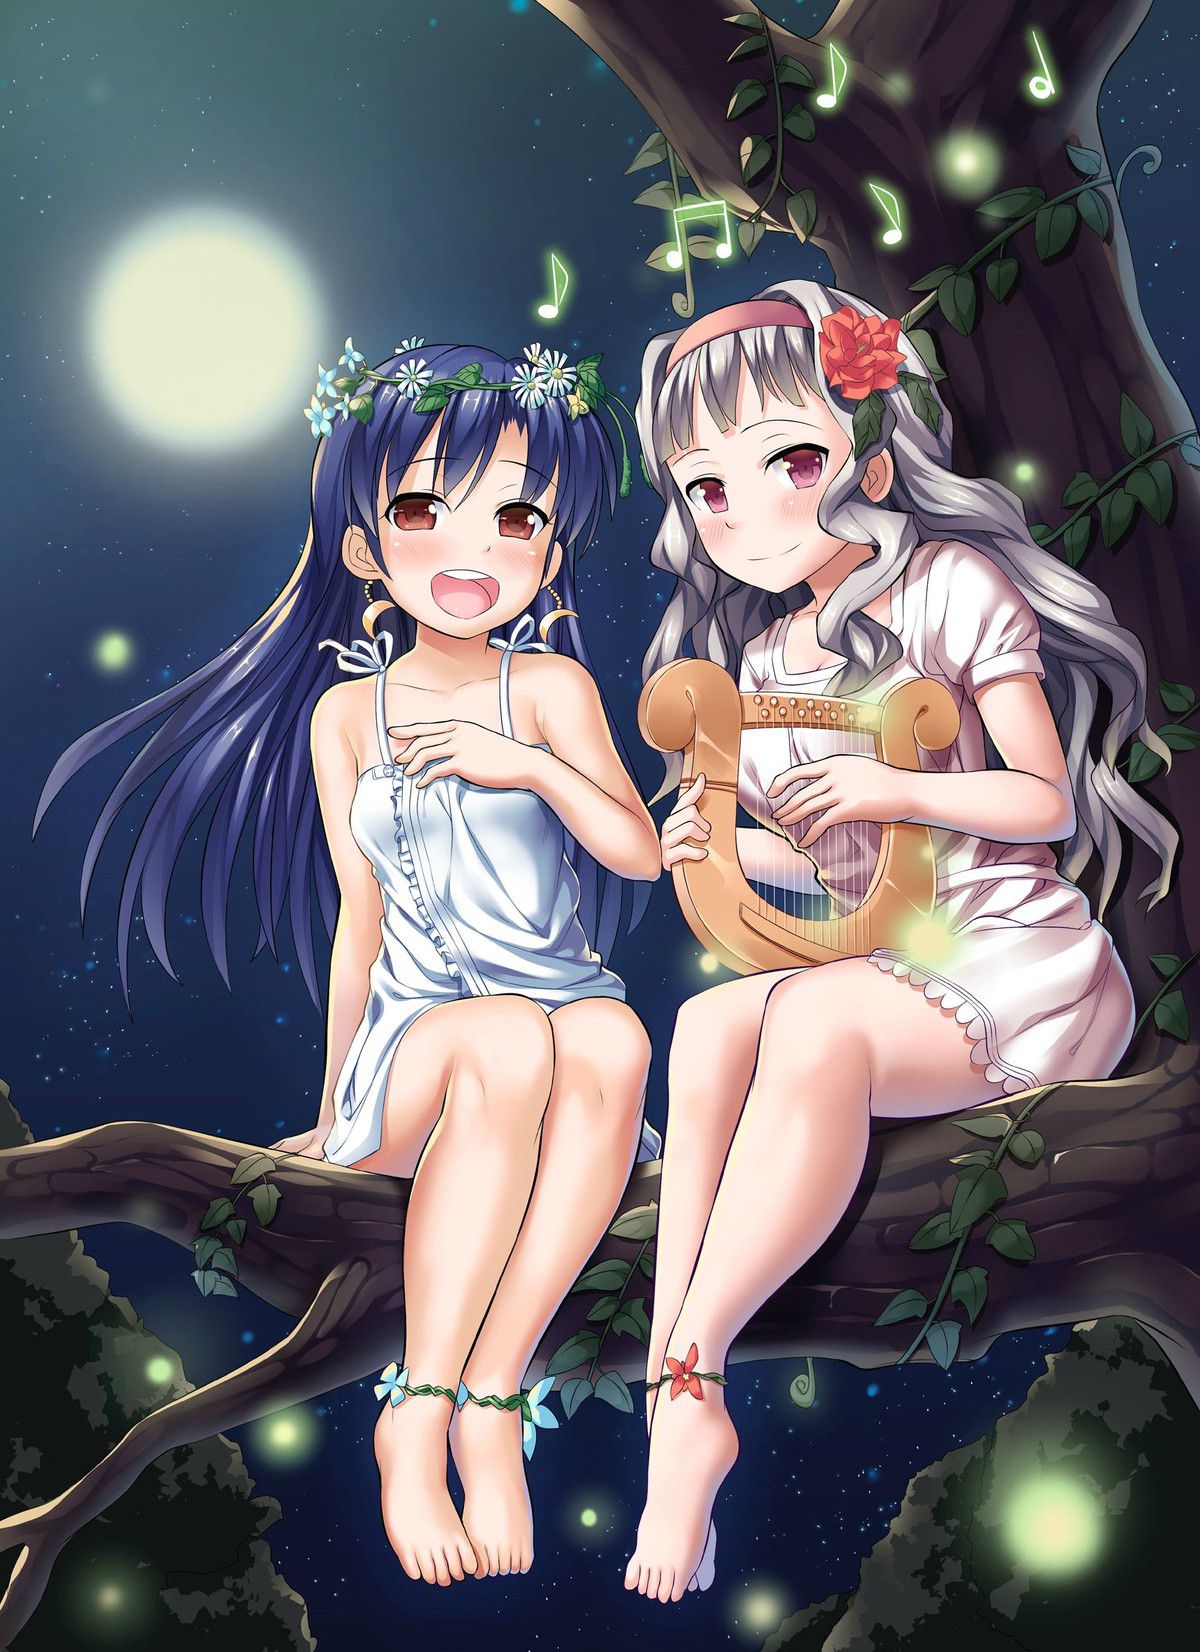 [Image] [ster] Kisaragi chihaya's thing I totally love illustrations of the wwwwwww 33